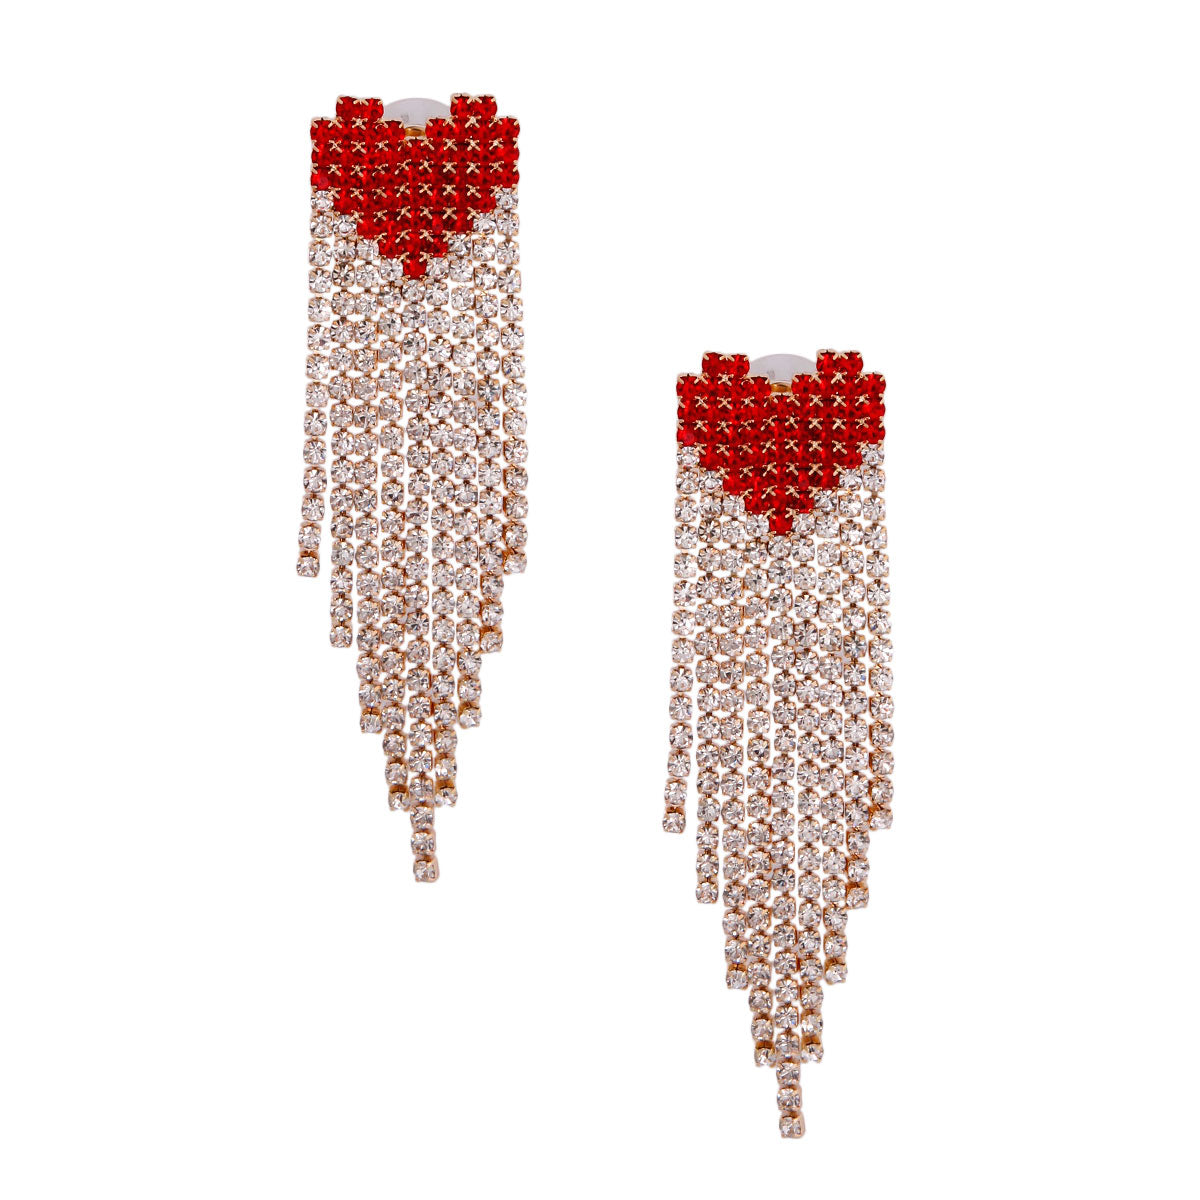 Red and Gold Heart Fringe Earrings